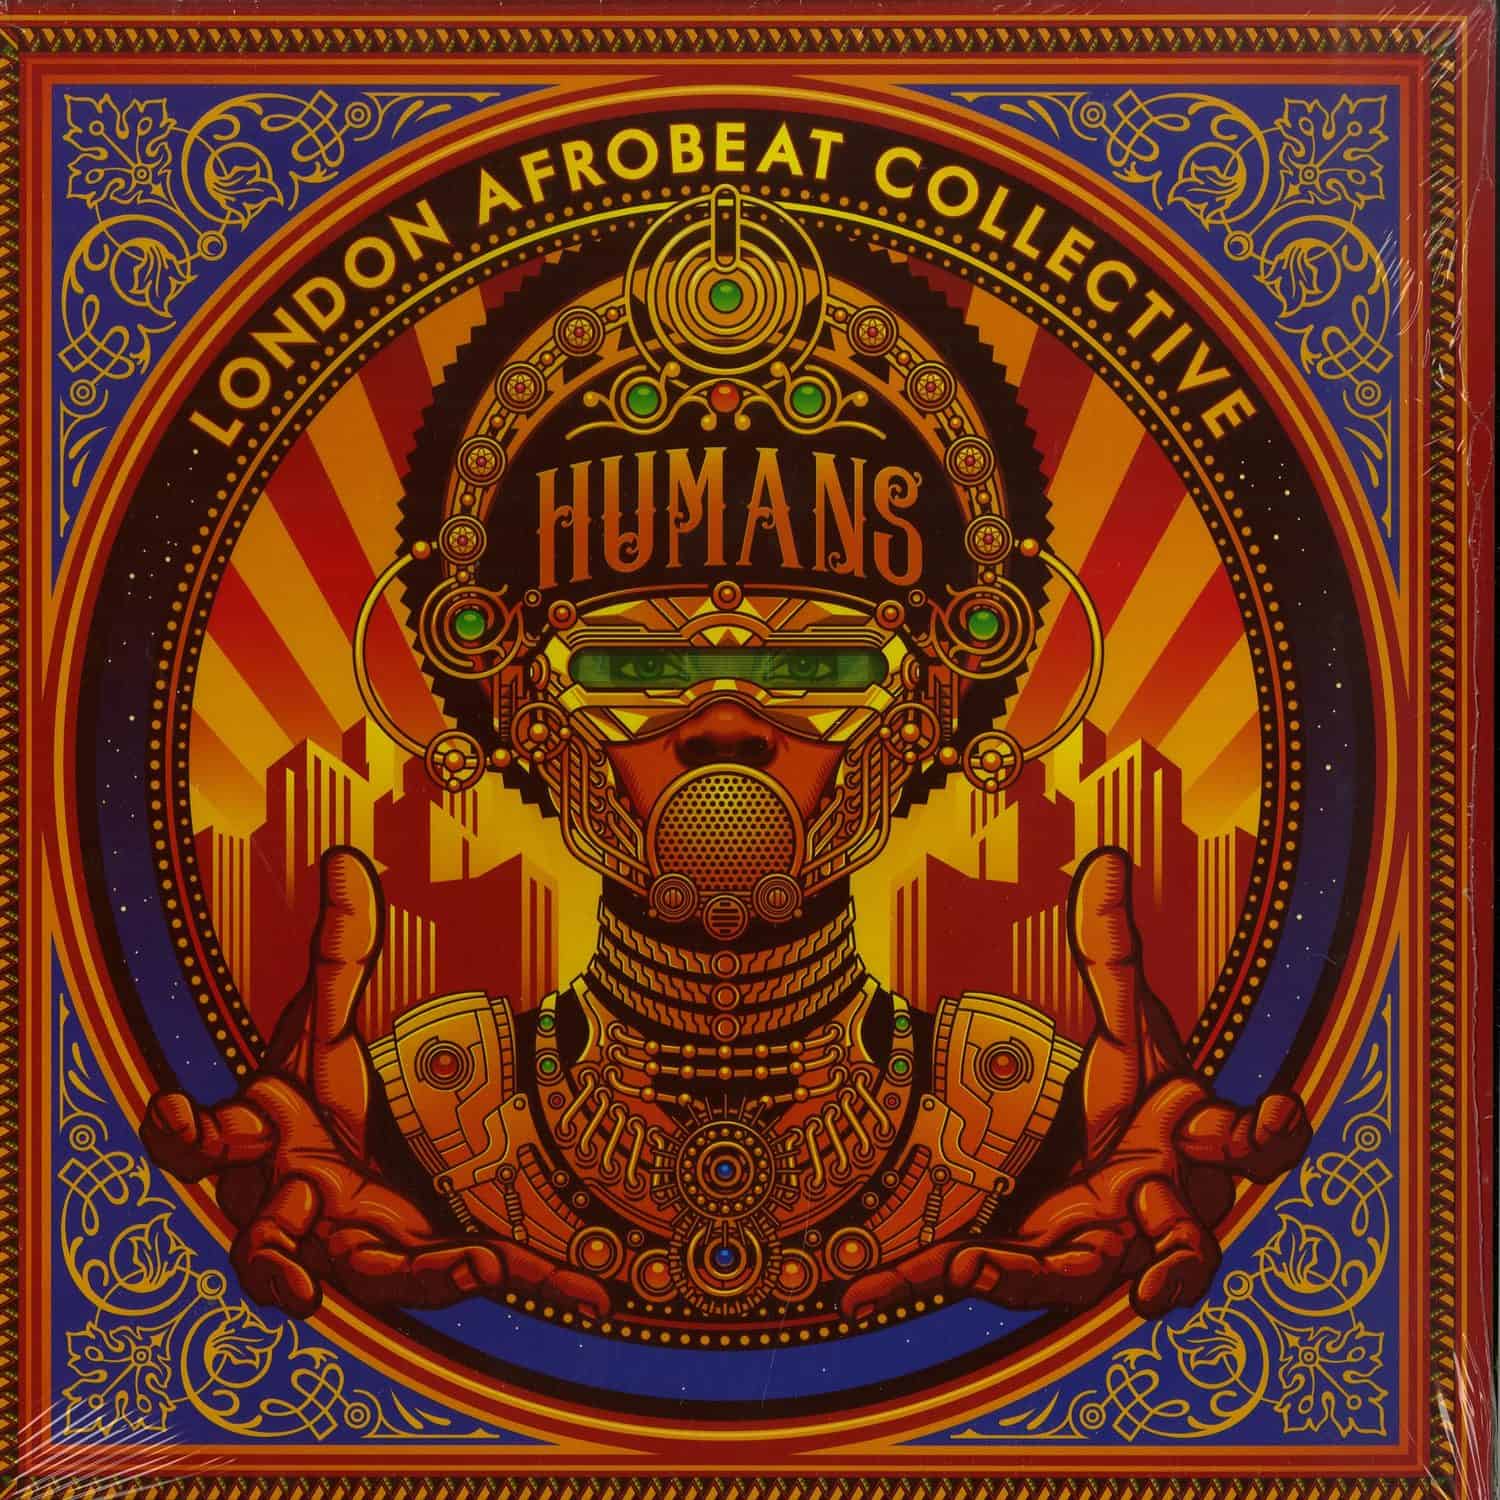 London Afrobeat Collective - HUMANS 